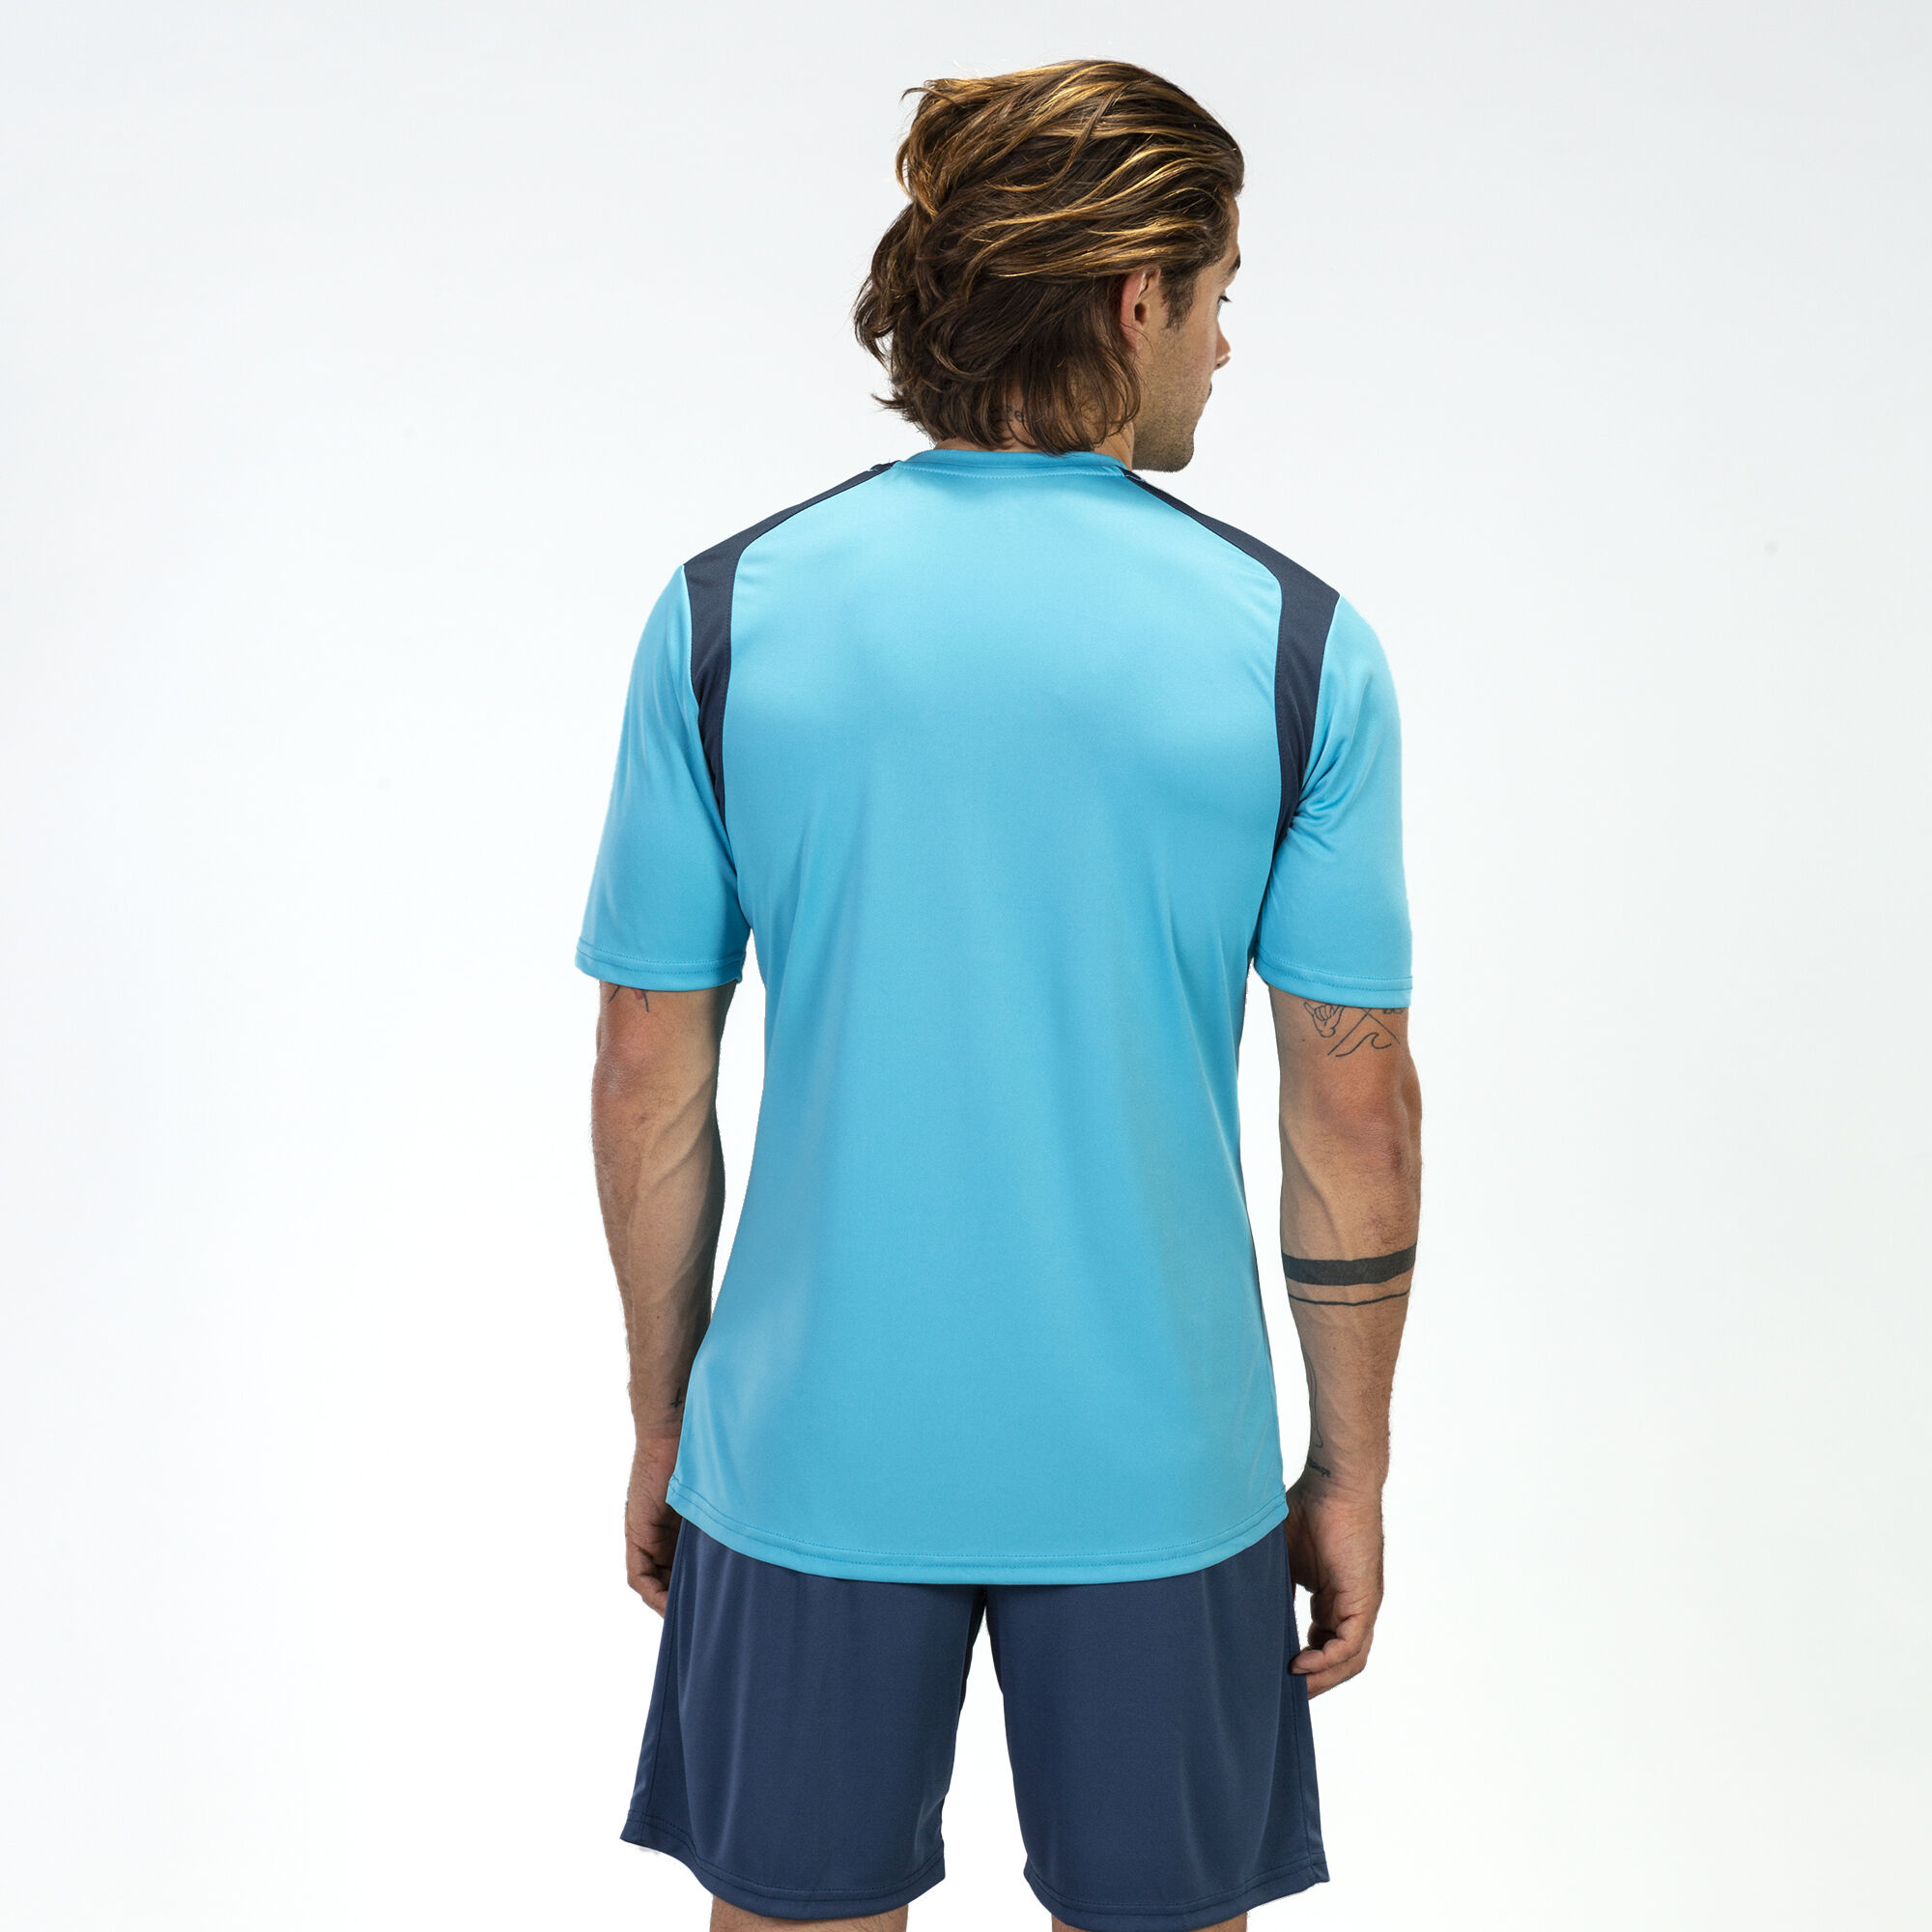 MAILLOT MANCHES COURTES HOMME CHAMPIONSHIP V TURQUOISE FLUO BLEU MARINE